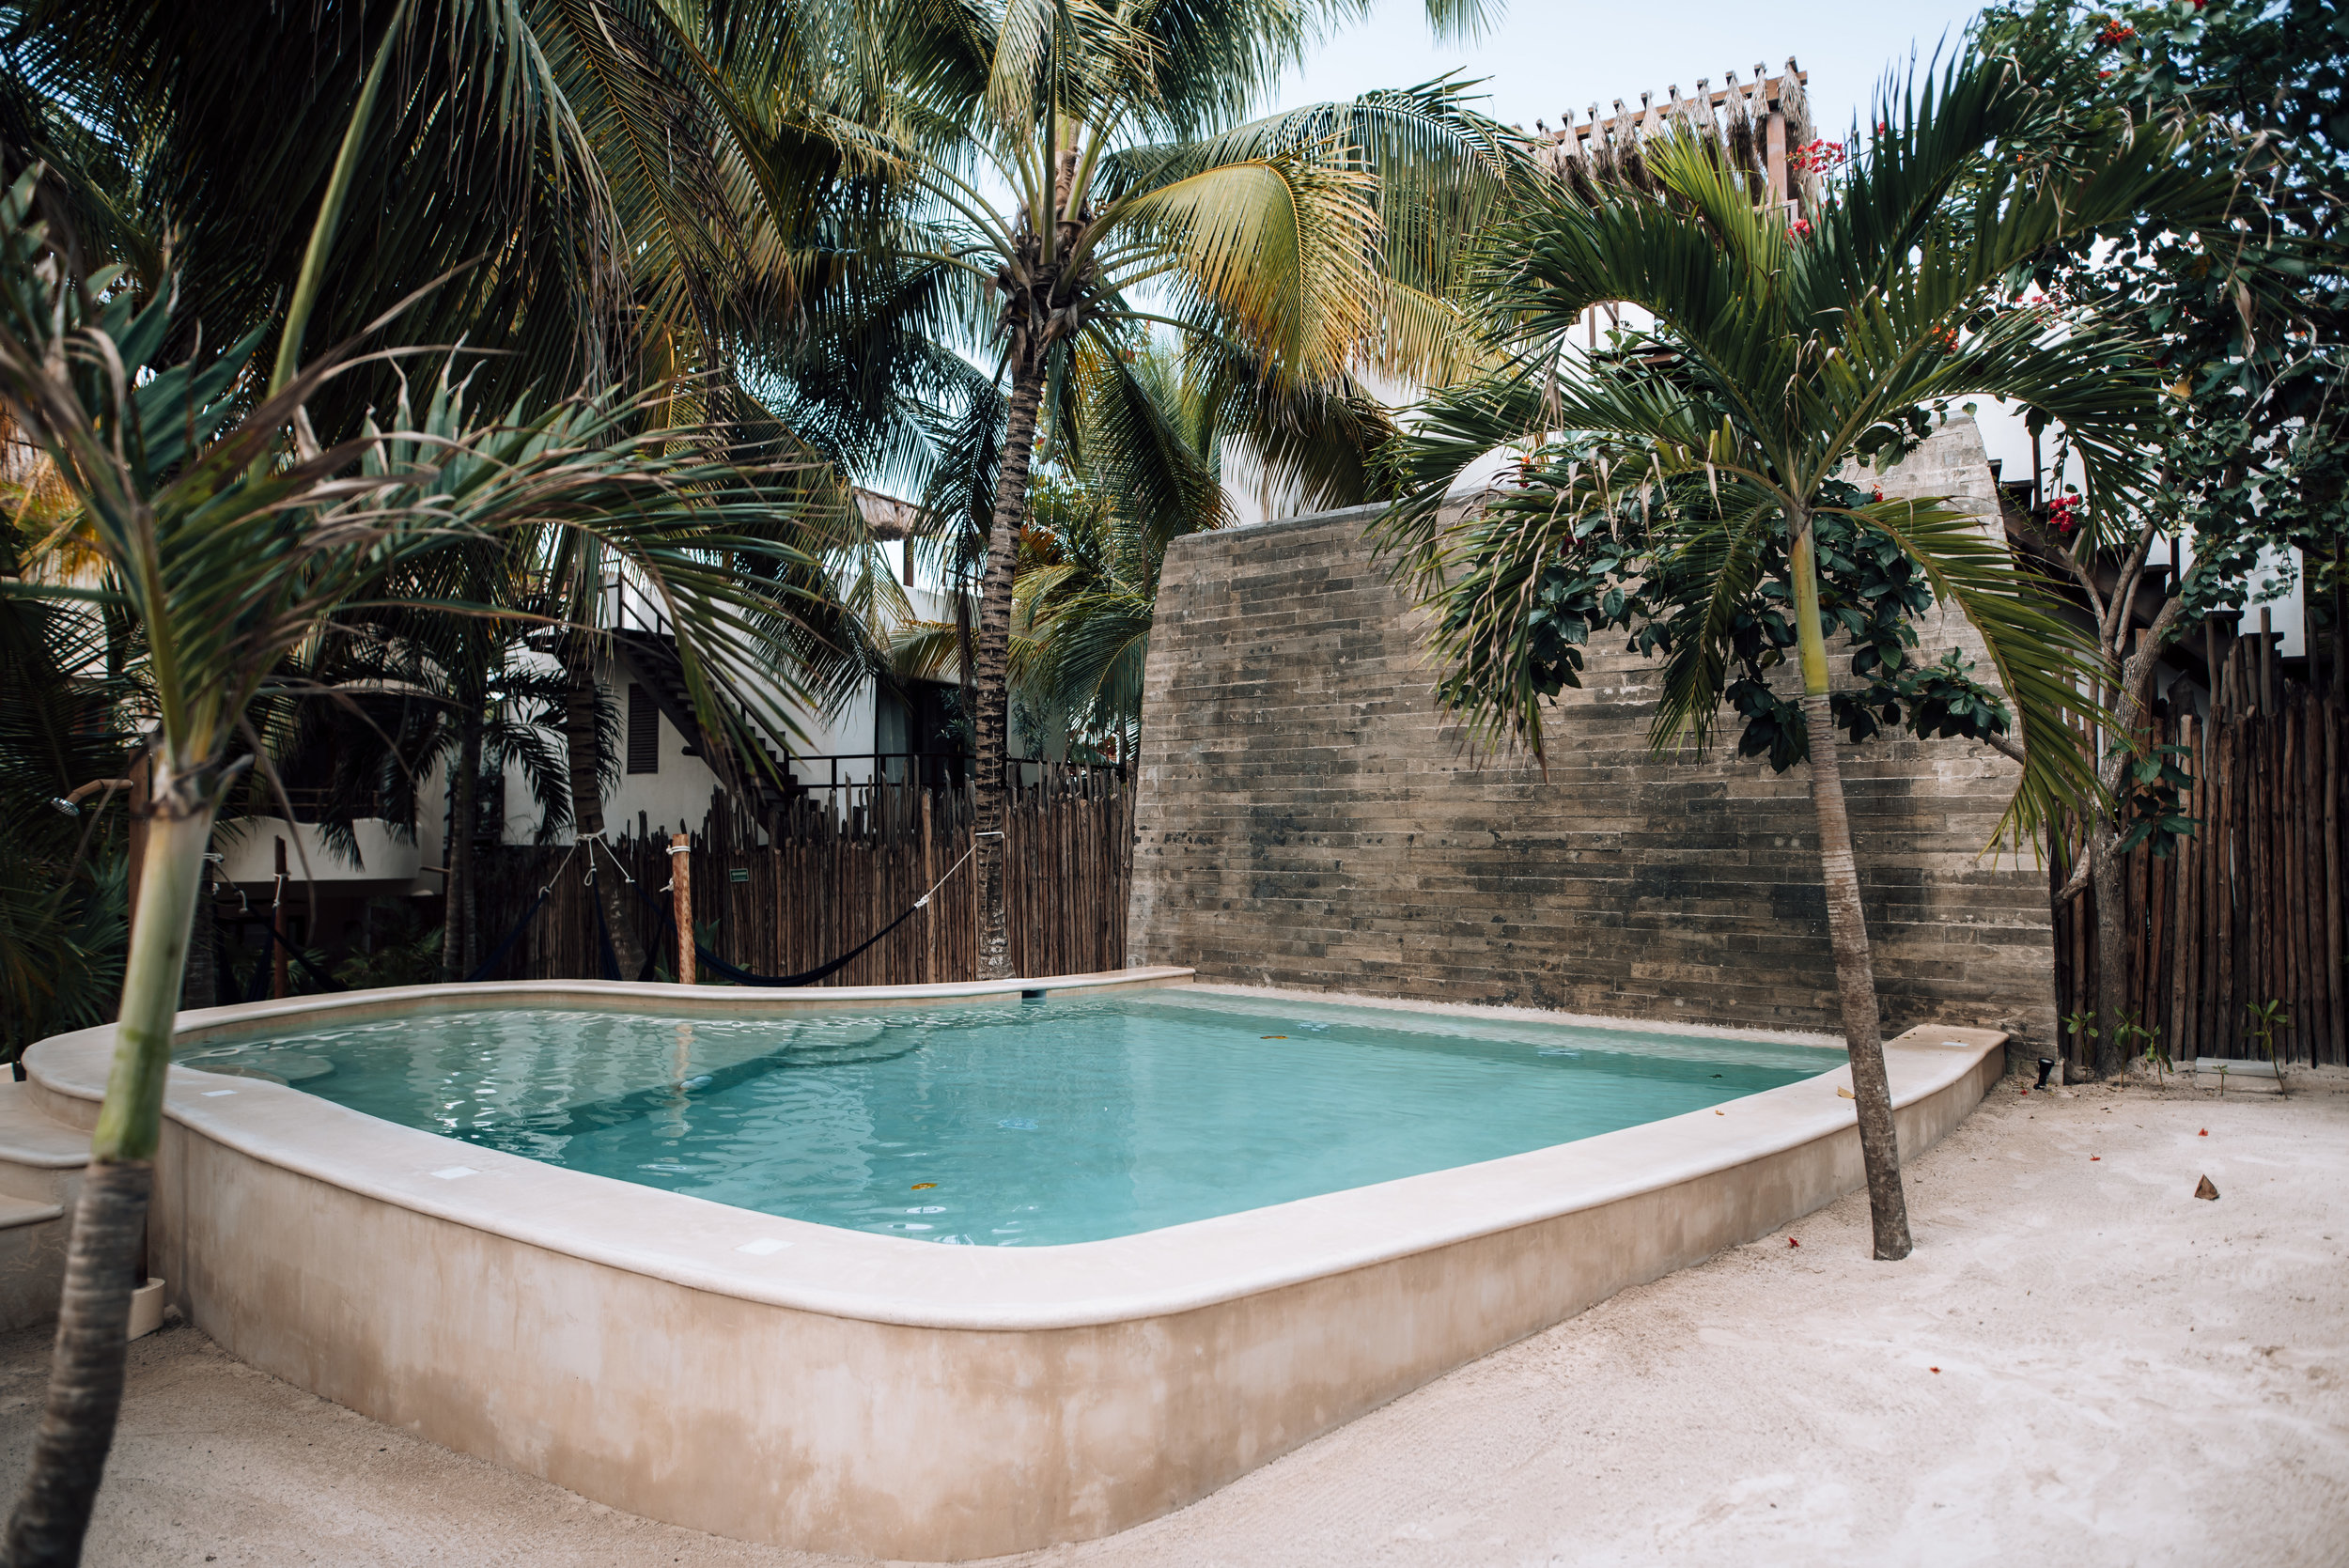  Zorba Beach Homes. Find the best hotels in Tulum for a girls weekend getaway in Tulum and the most Instagrammable hotels in Tulum perfect for a girls trip to Tulum. #tulummexico #tulumhotels | Tulum hotels design | Tulum hotels luxury | best hotels 